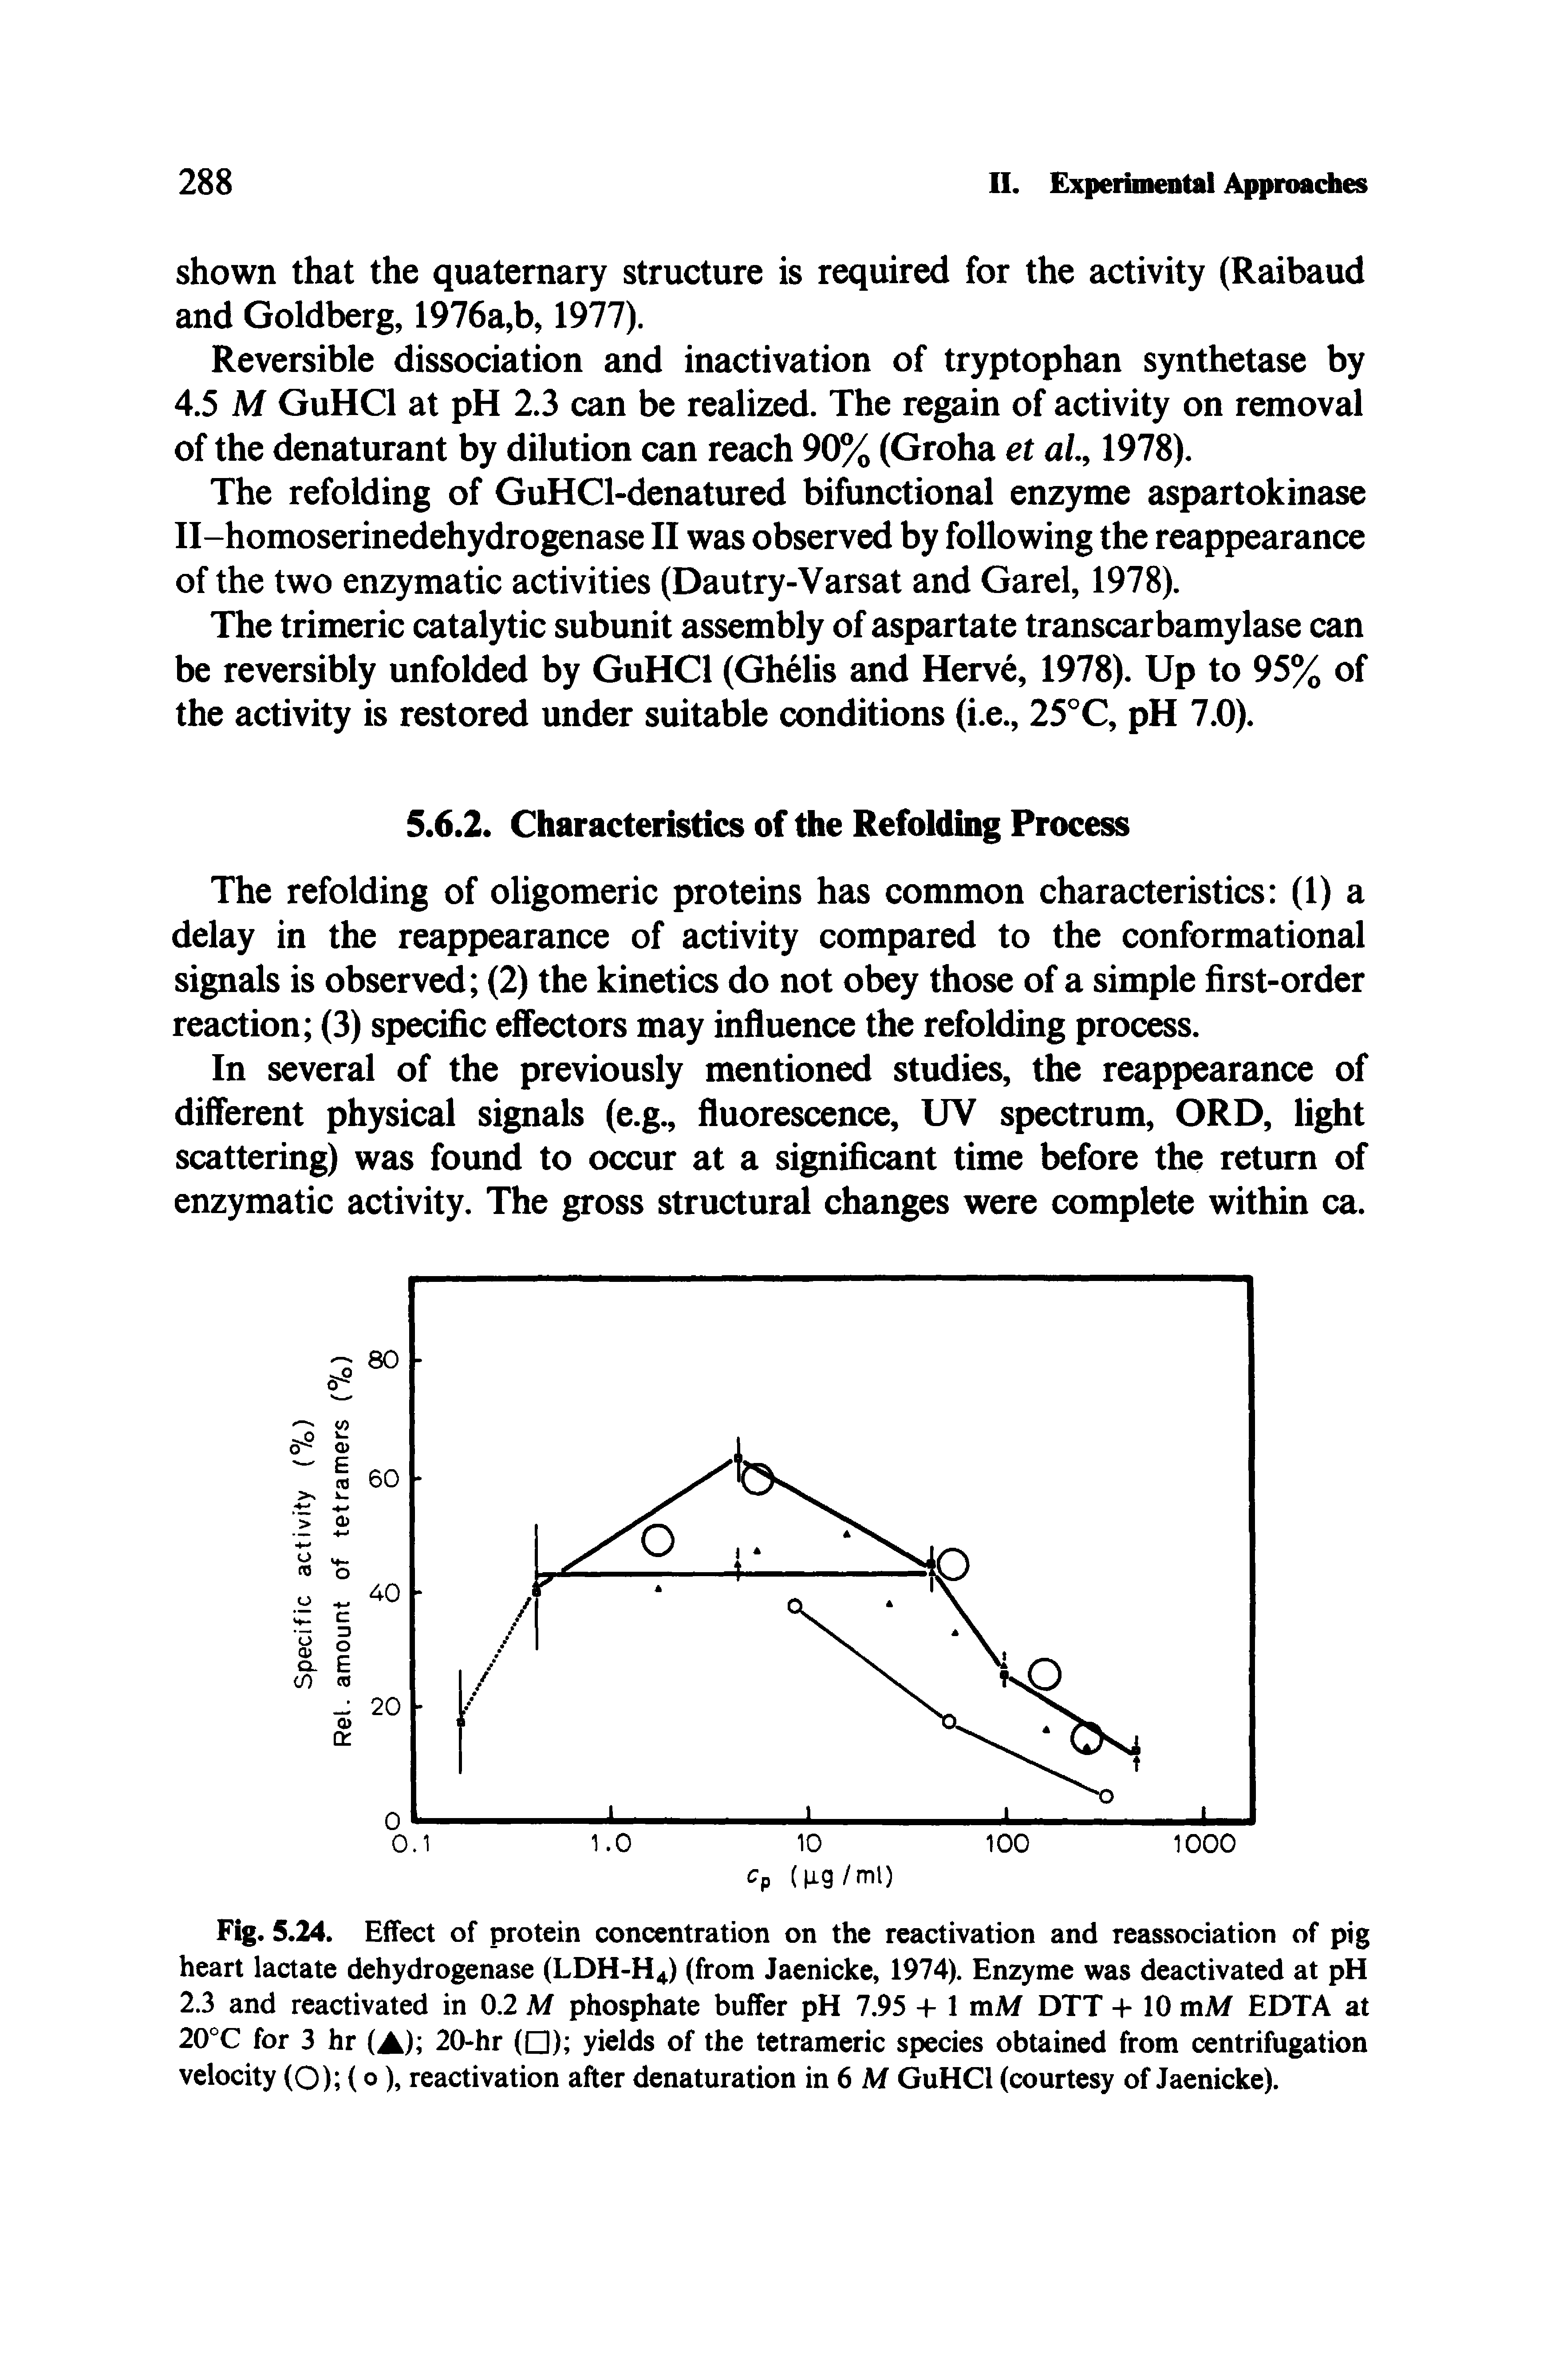 Fig. 5.24. Effect of protein concentration on the reactivation and reassociation of pig heart lactate dehydrogenase (LDH-H4) (from Jaenicke, 1974). Enzyme was deactivated at pH 2.3 and reactivated in 0.2 M phosphate buffer pH 7.95 + 1 mM DTT +10 mM EDTA at 20°C for 3 hr (A) 20-hr ( ) yields of the tetrameric species obtained from centrifugation velocity (O) (o), reactivation after denaturation in 6 M GuHCl (courtesy of Jaenicke).